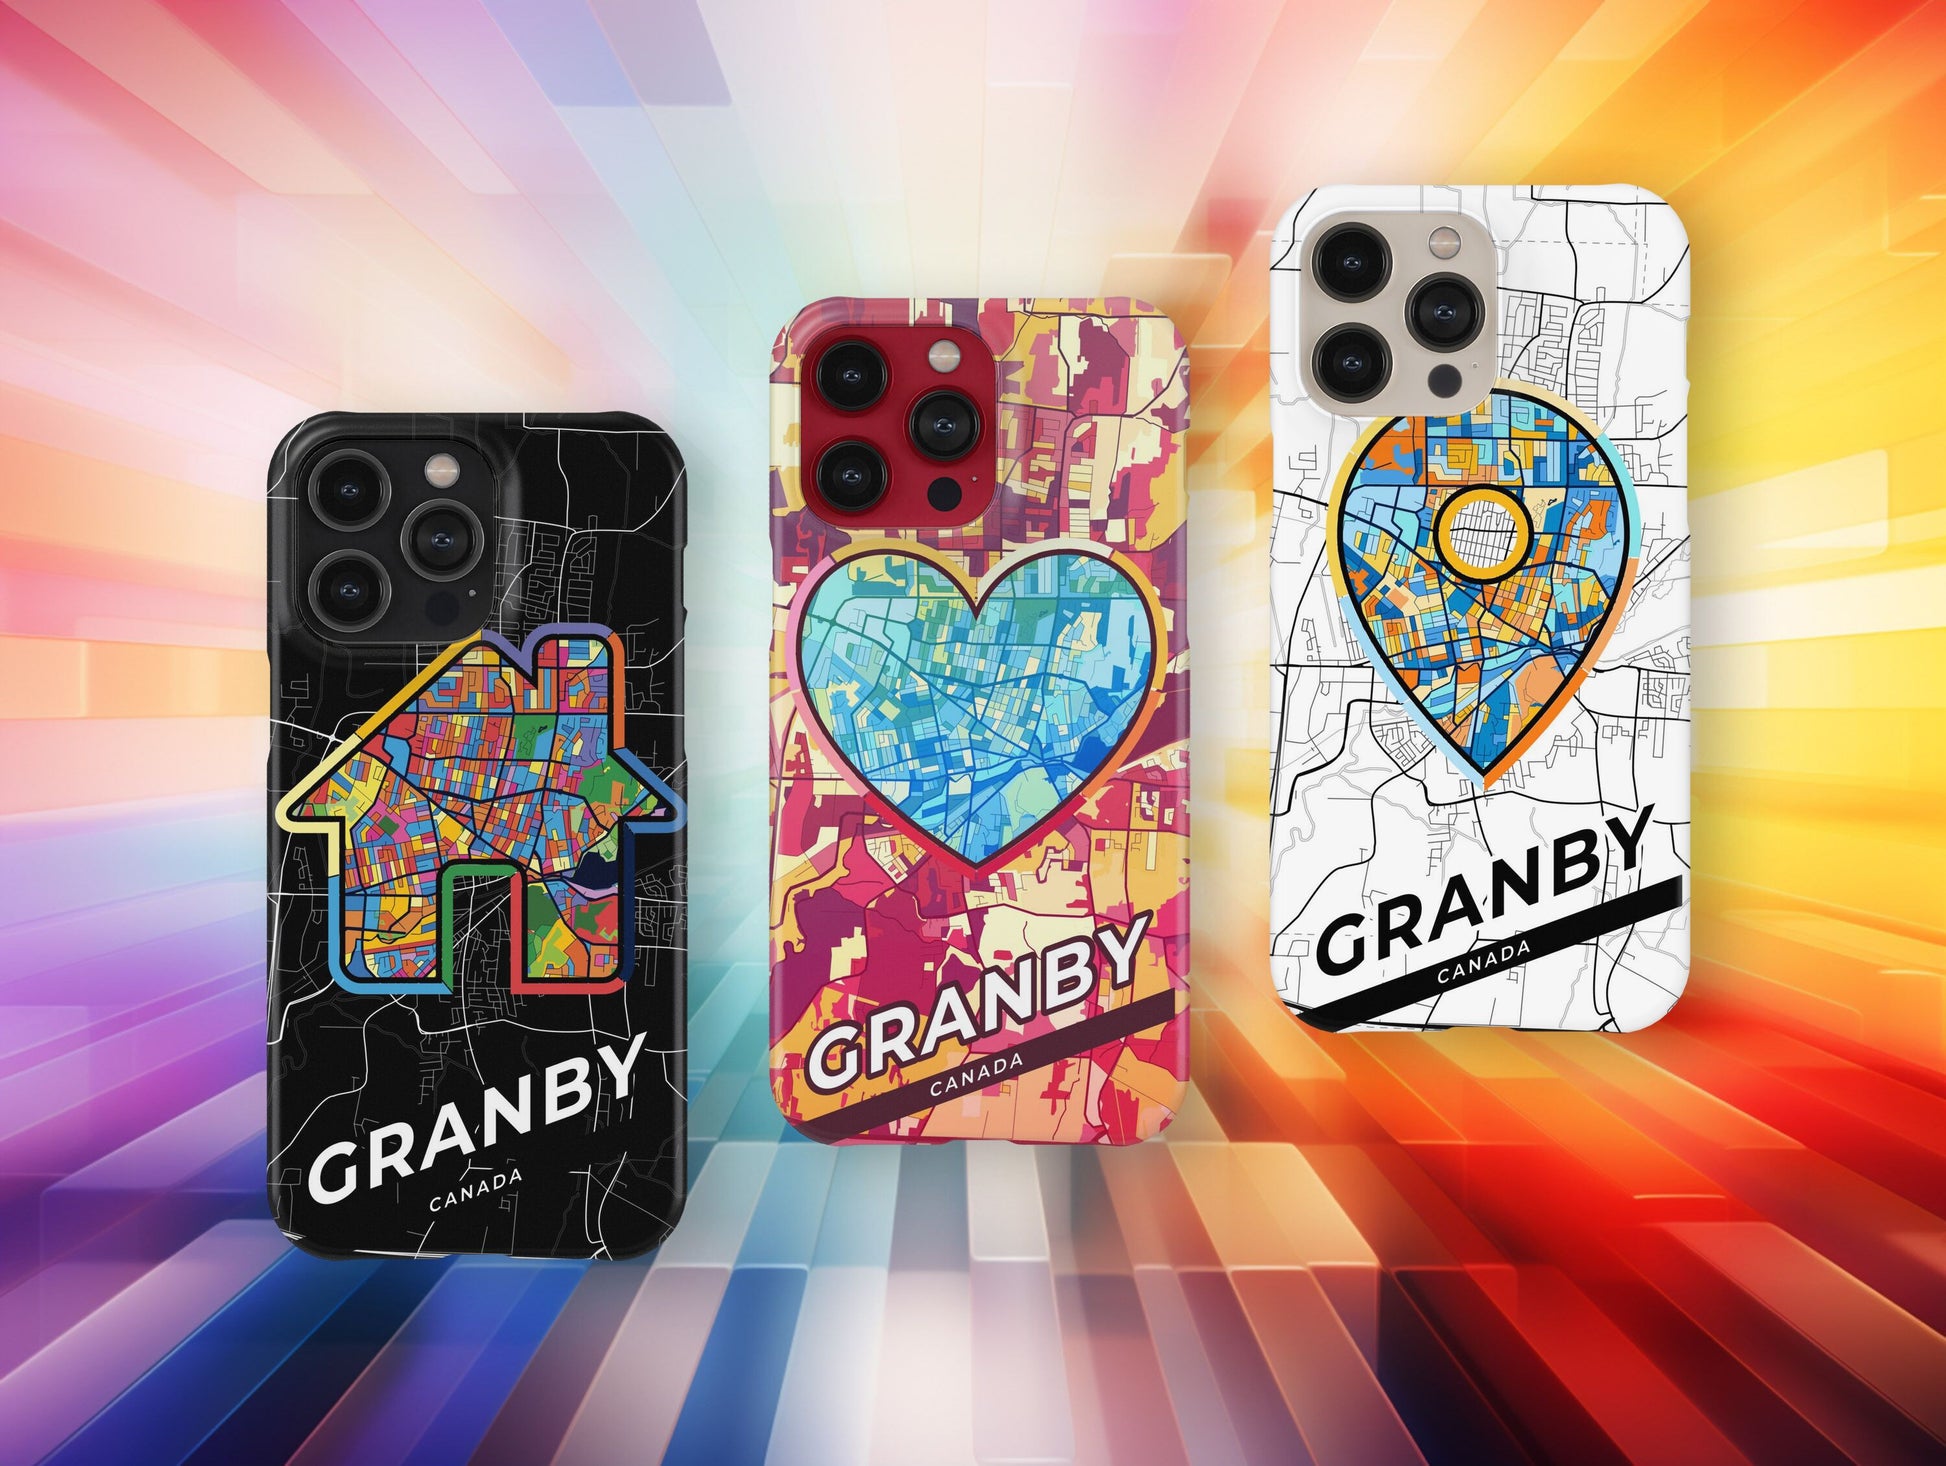 Granby Canada slim phone case with colorful icon. Birthday, wedding or housewarming gift. Couple match cases.